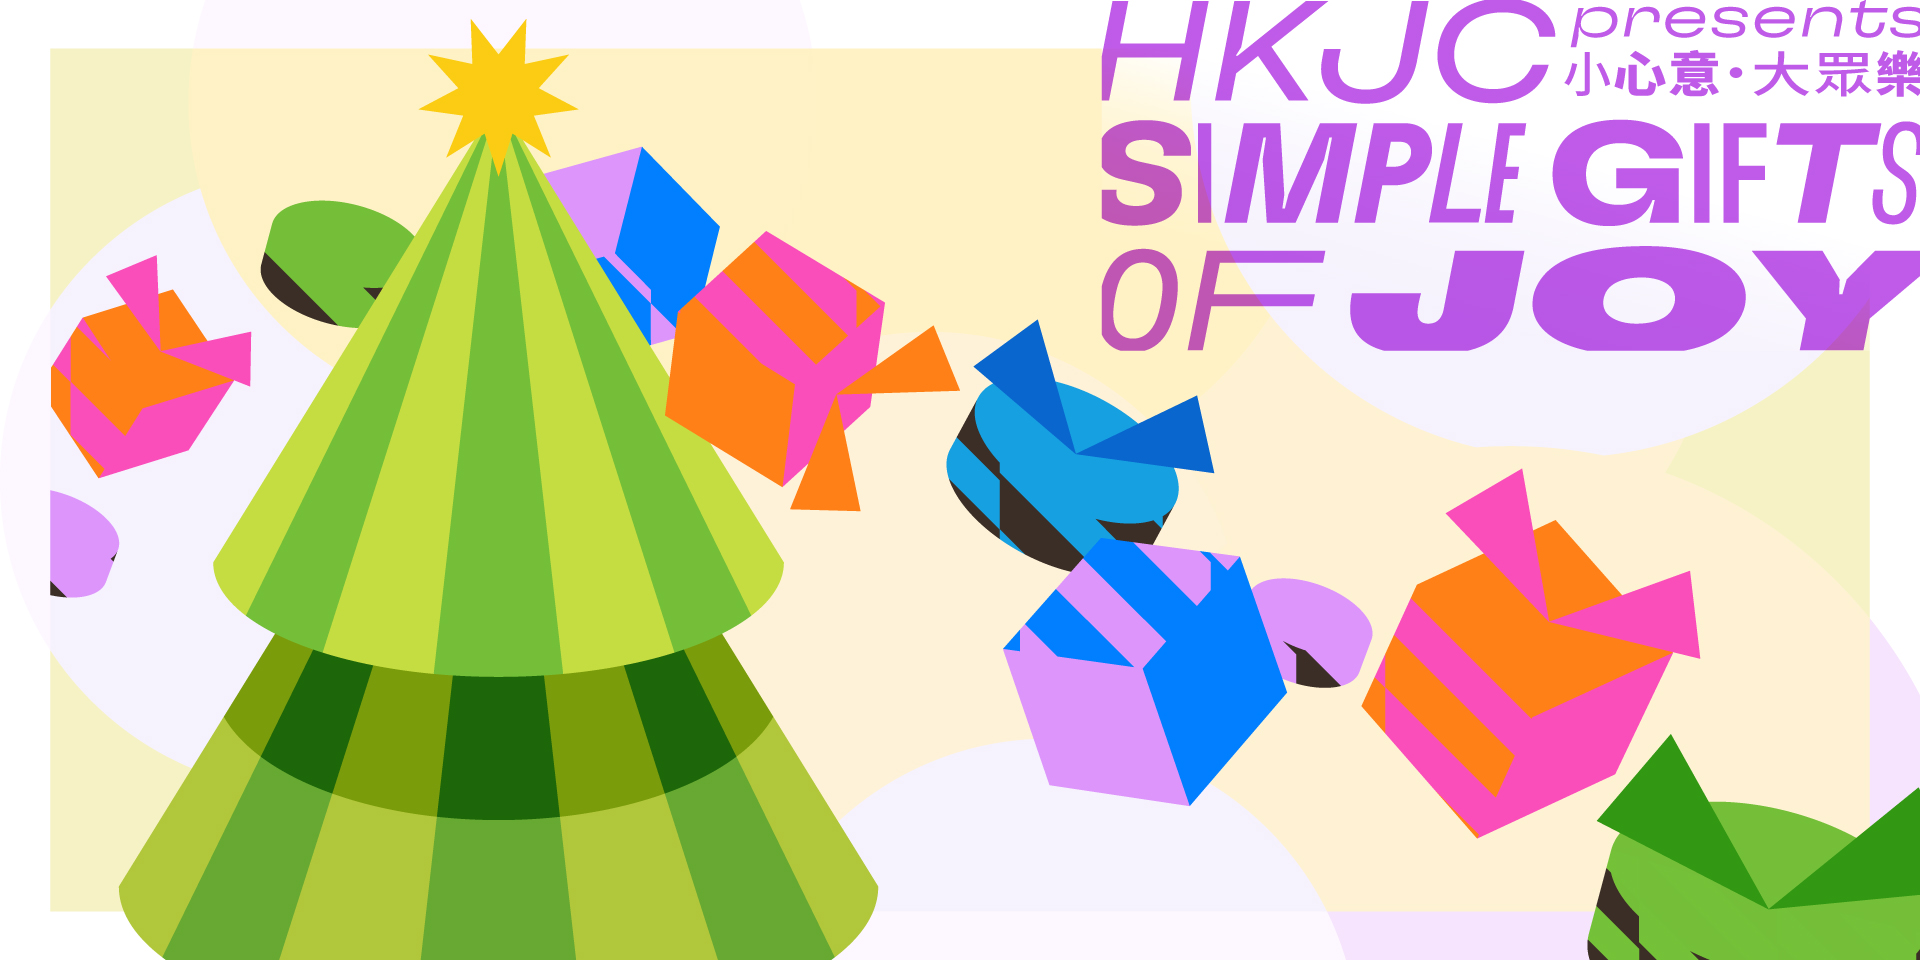 03. Simple Gifts of Joy